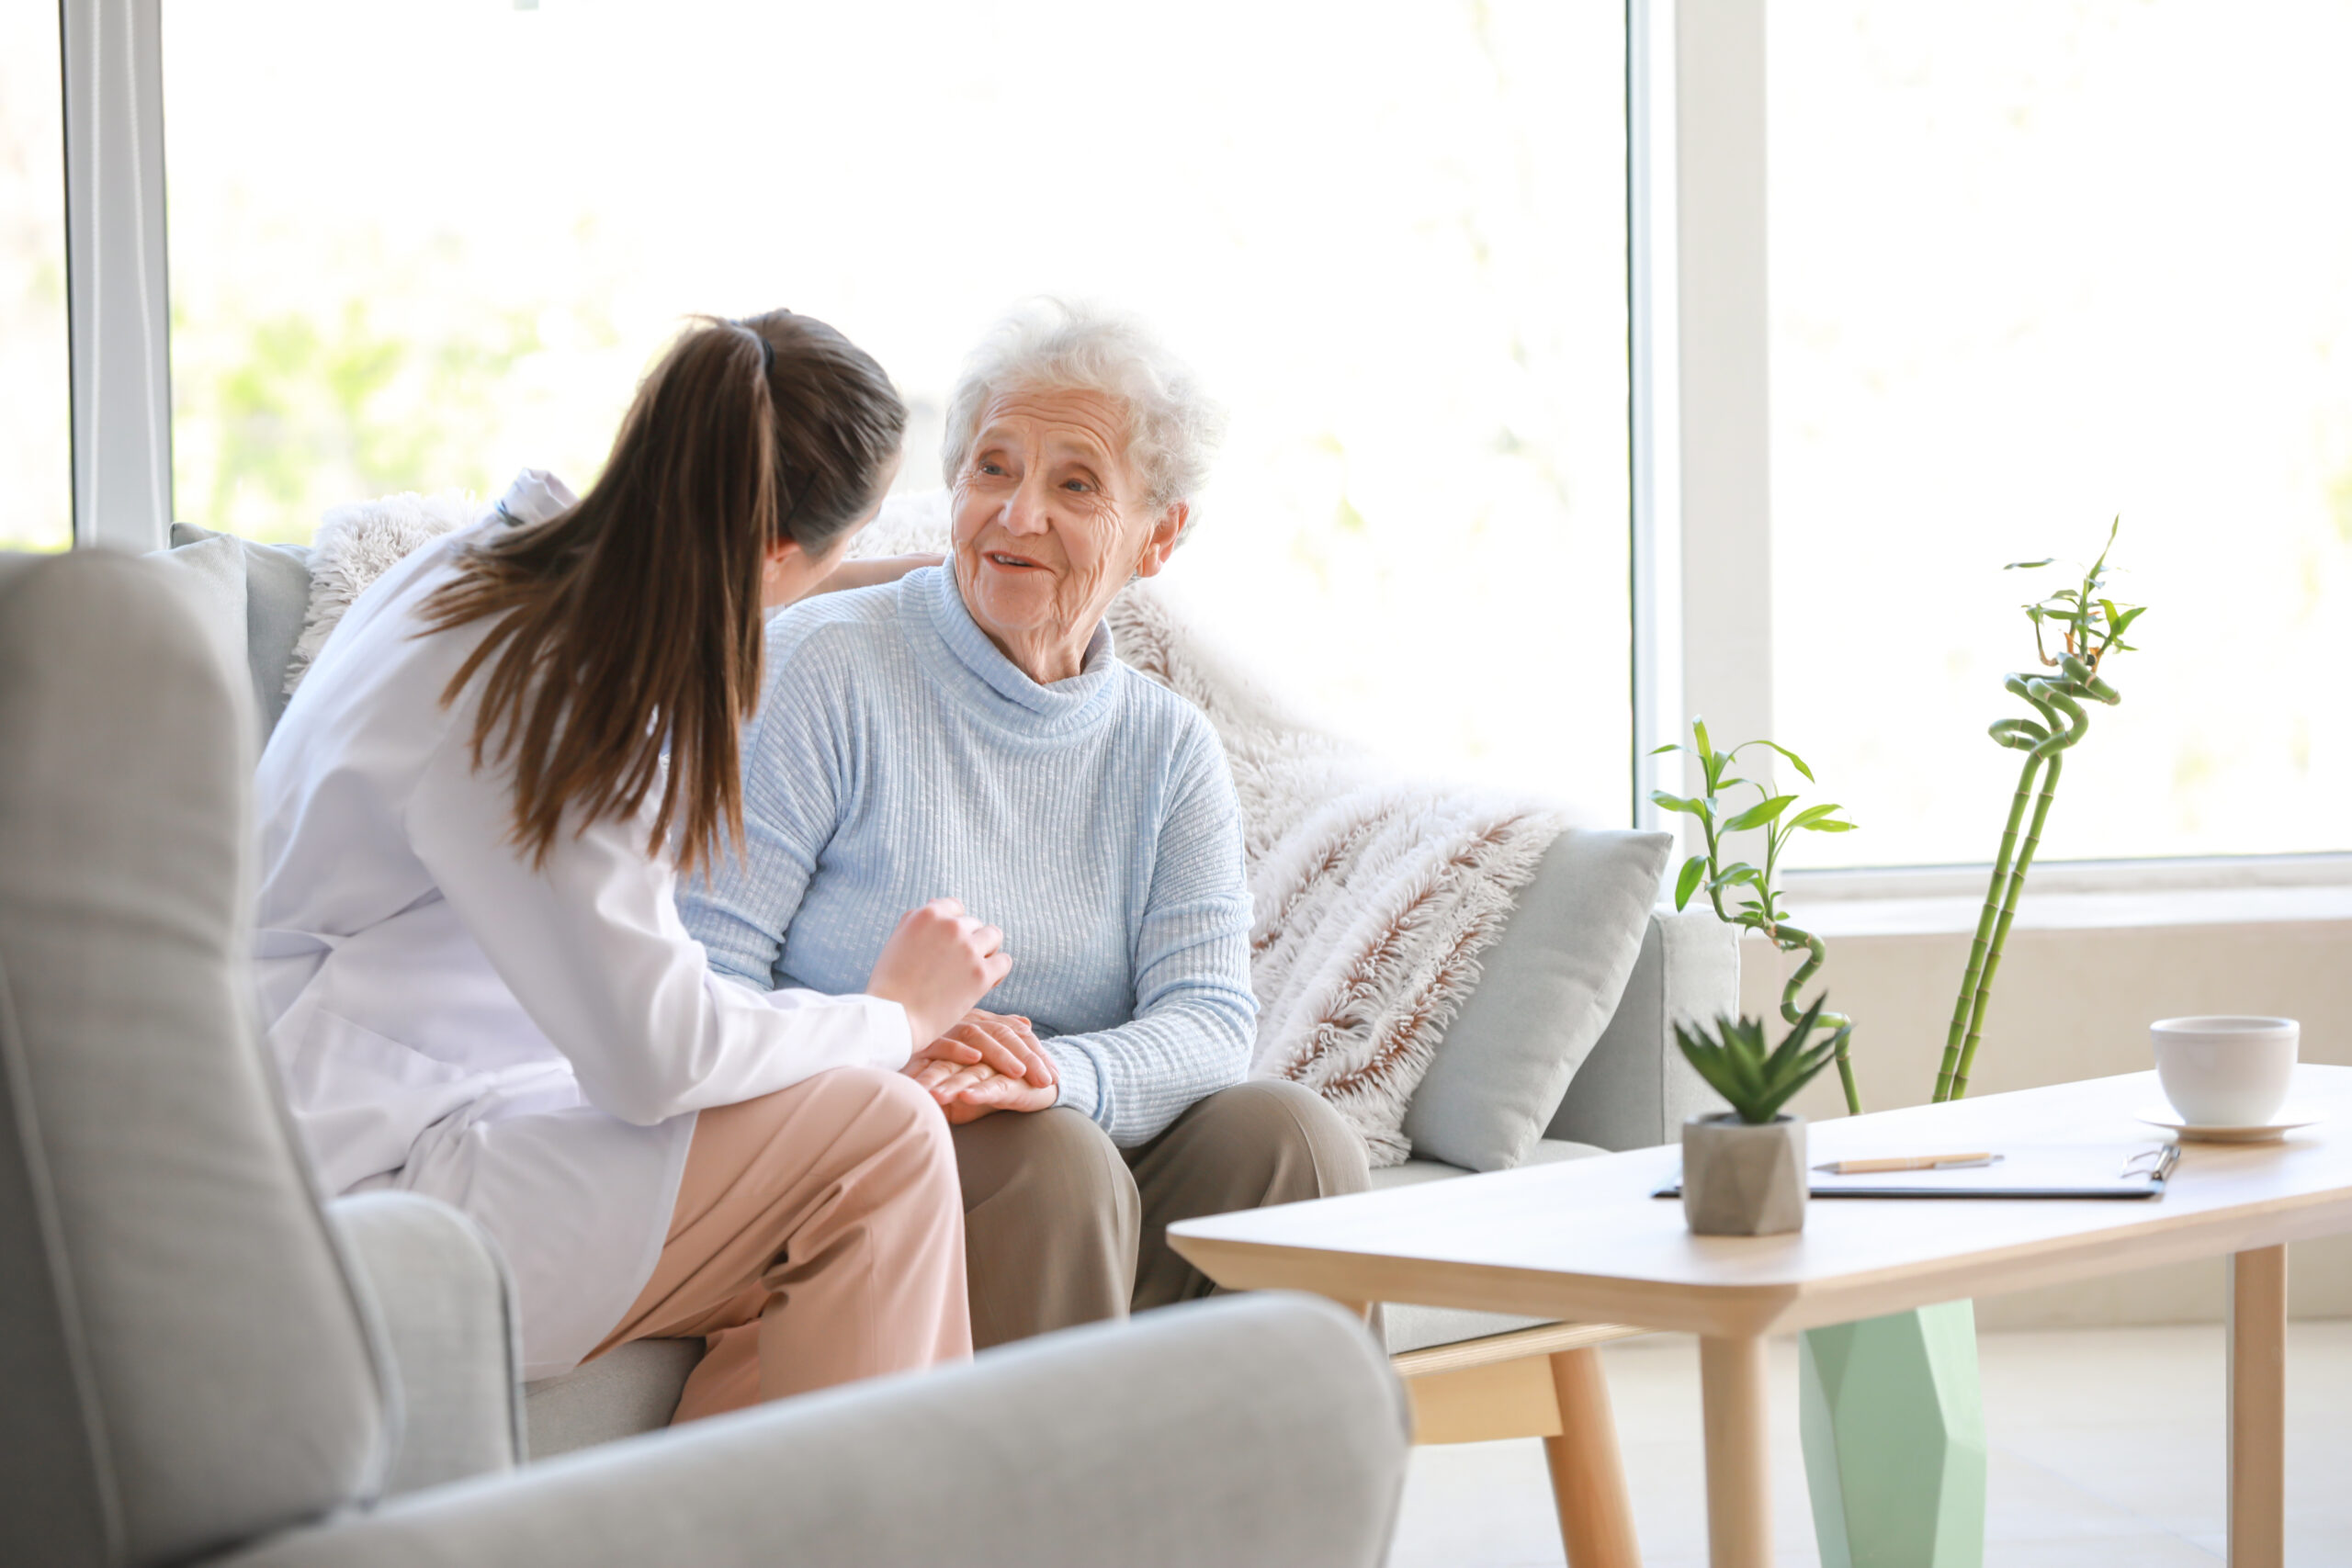 Nurse discussing the essentials to aging in place with an elderly woman at home.